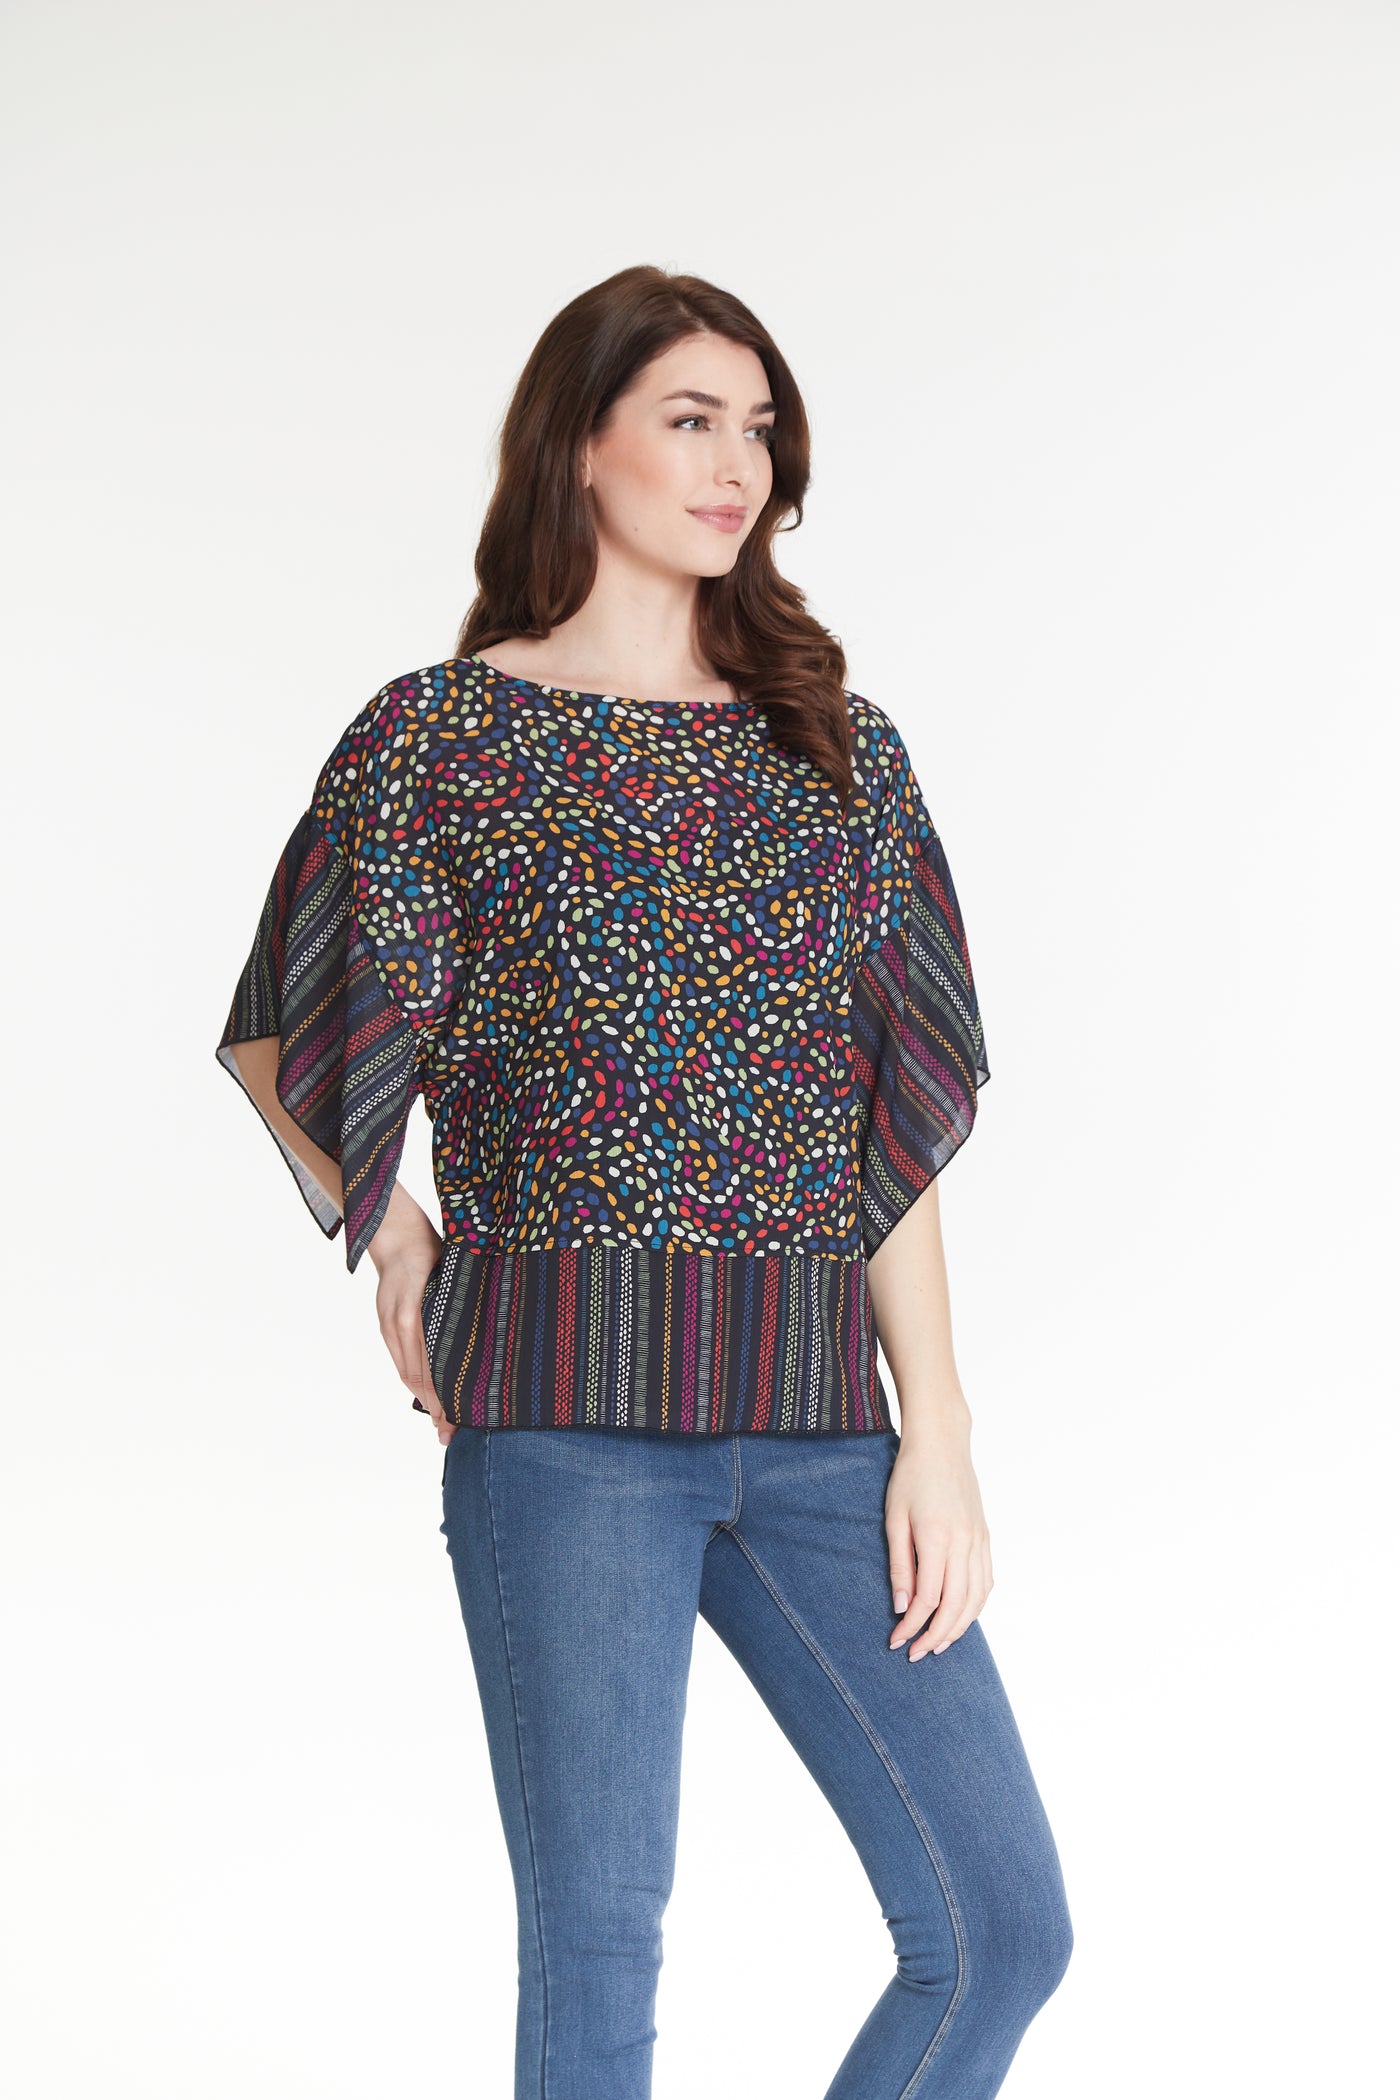 Poncho Top and Cami - Multi